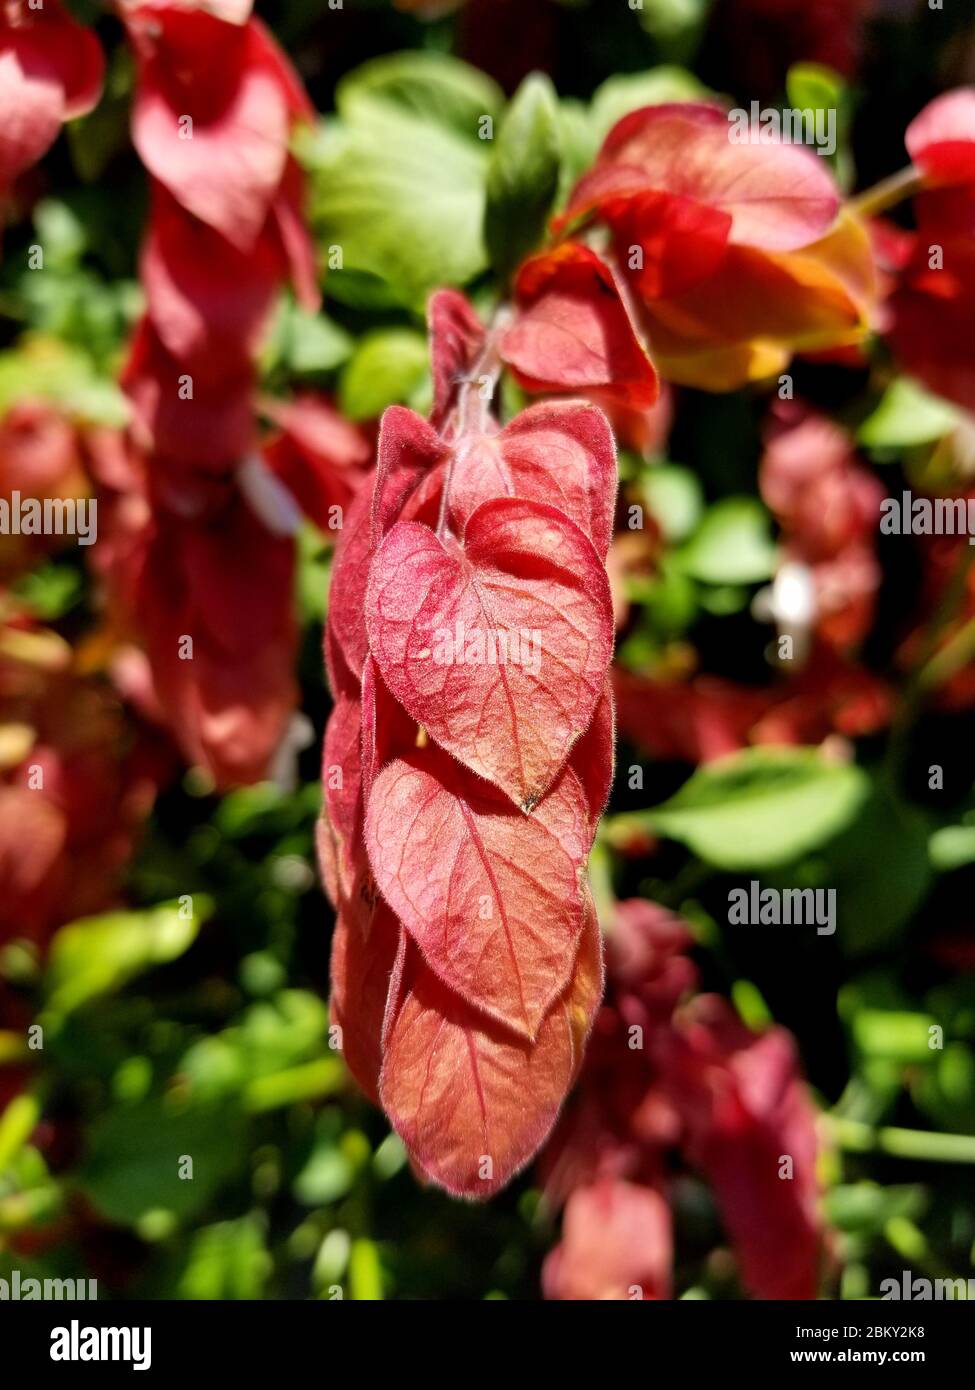 Deep red color of Shrimp plants that attracts hummingbirds Stock Photo